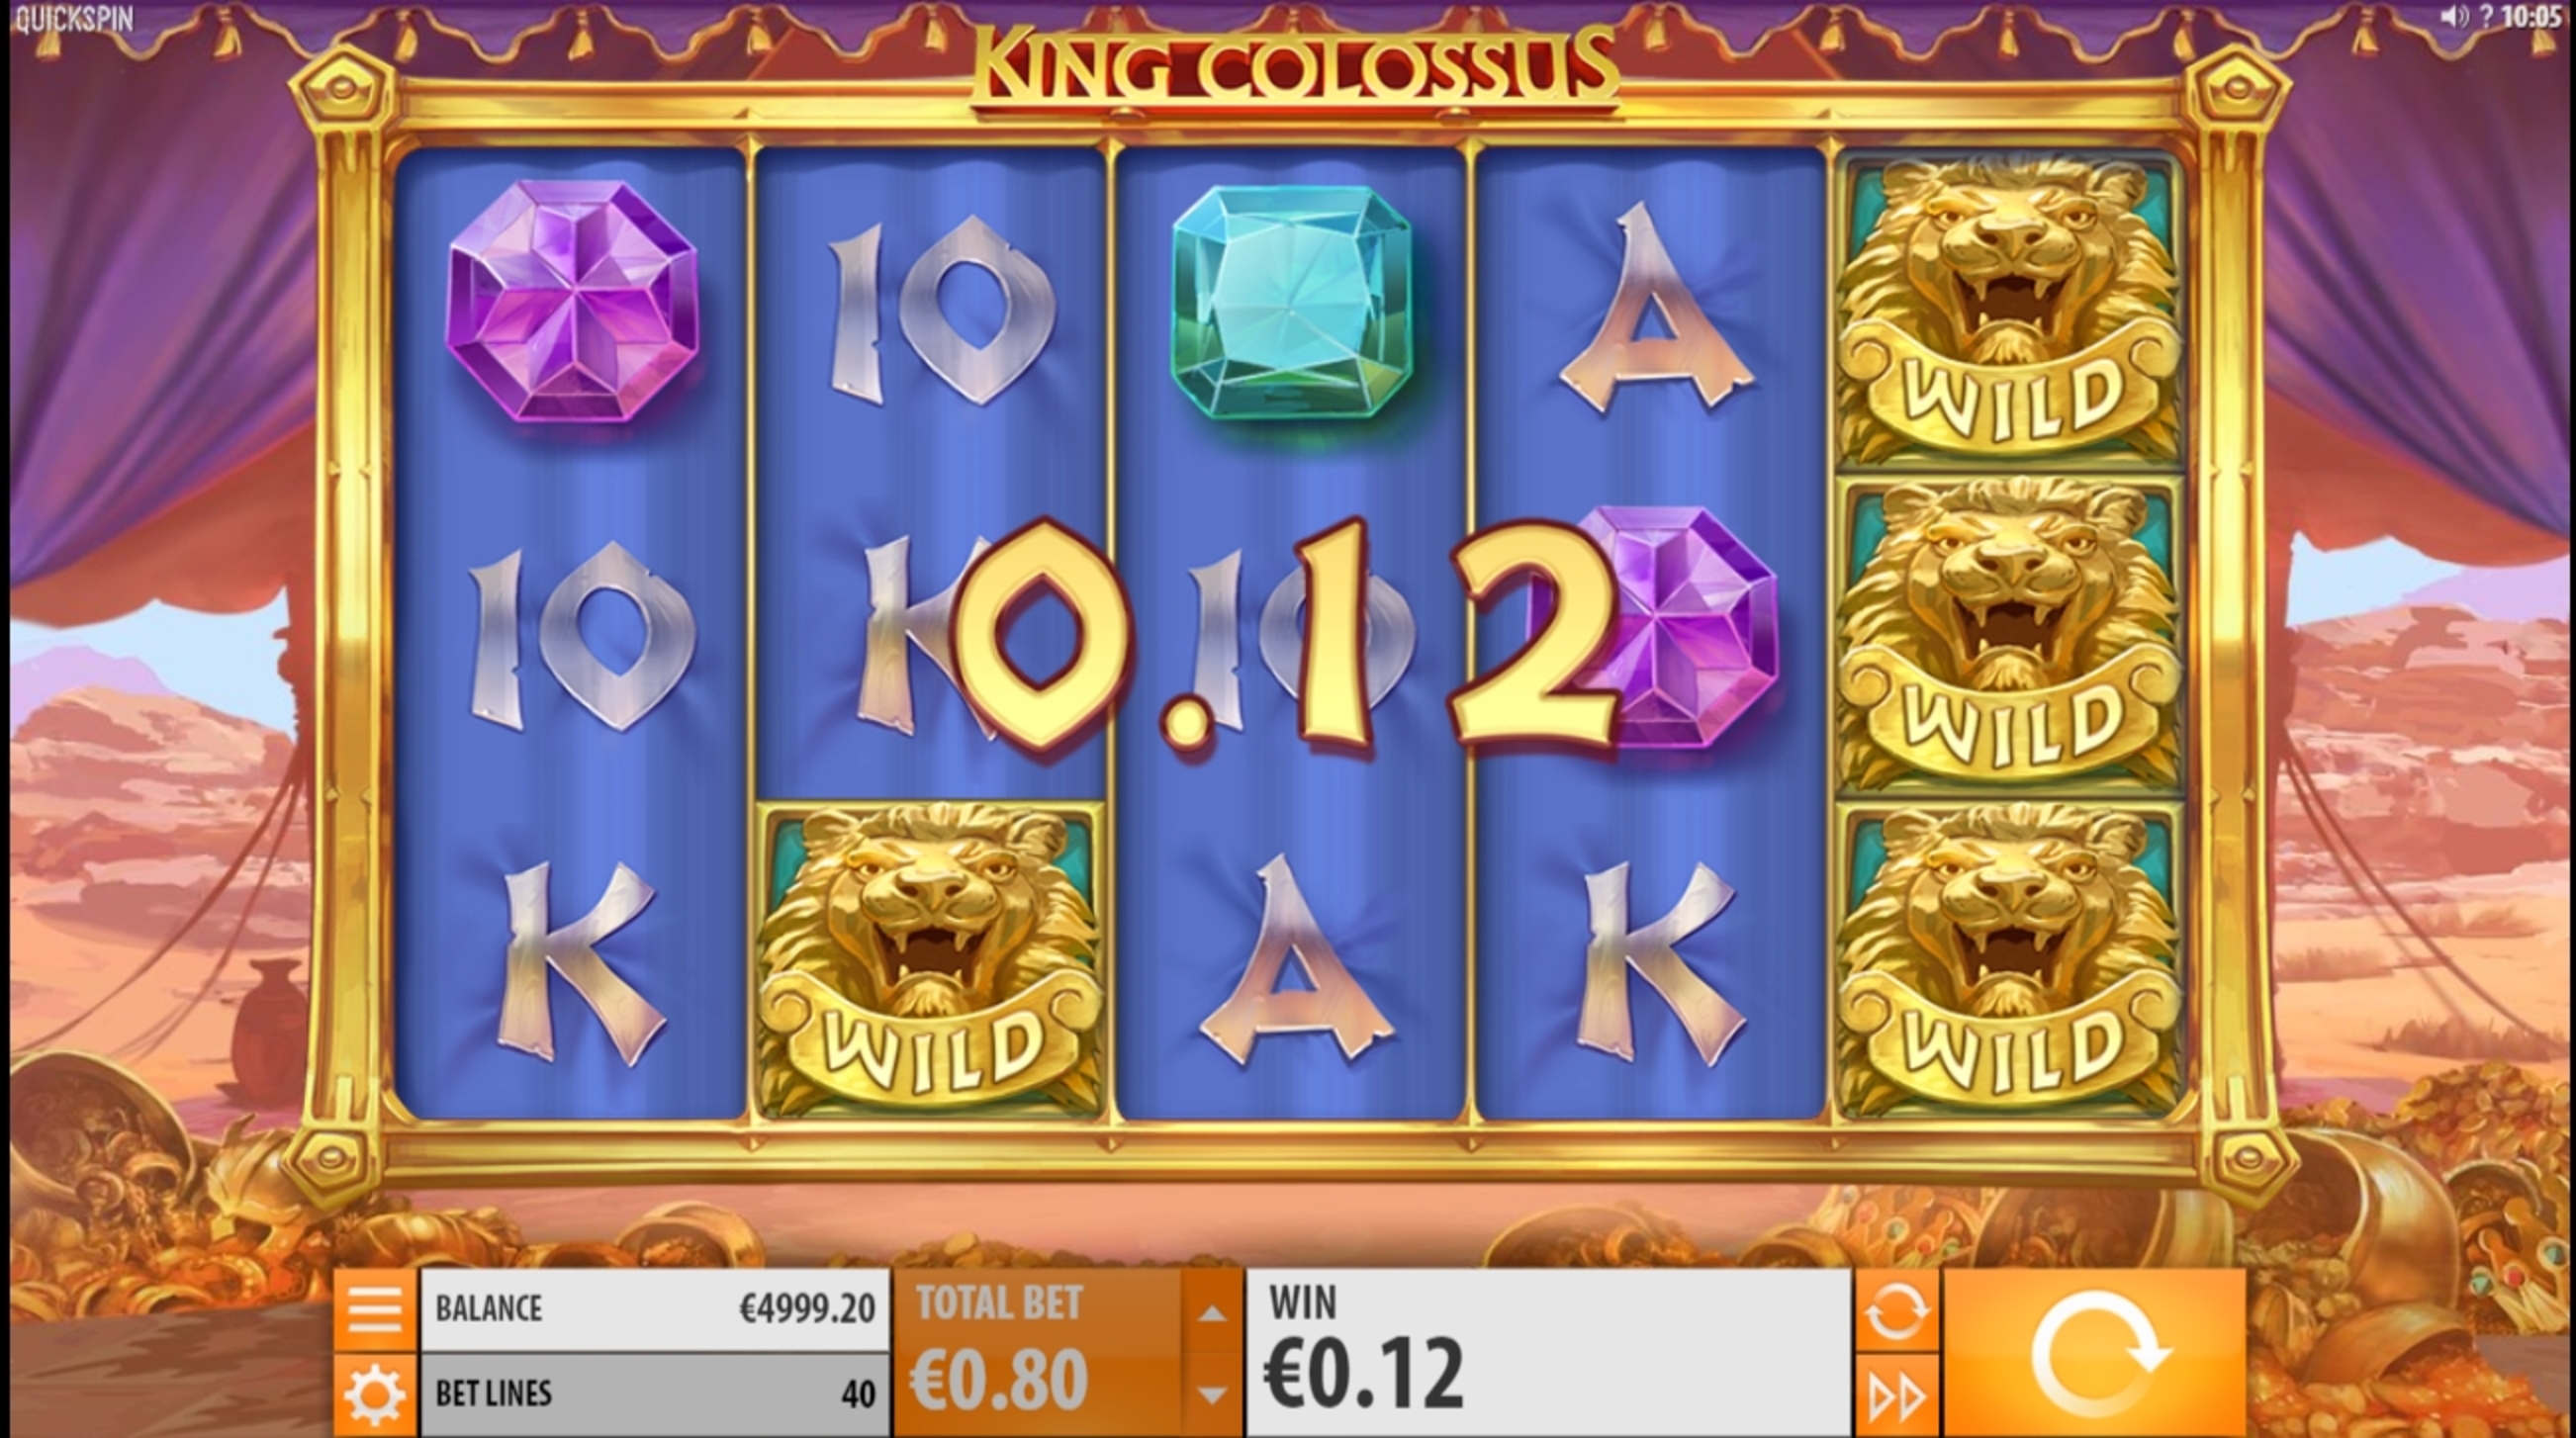 Win Money in King Colossus Free Slot Game by Quickspin